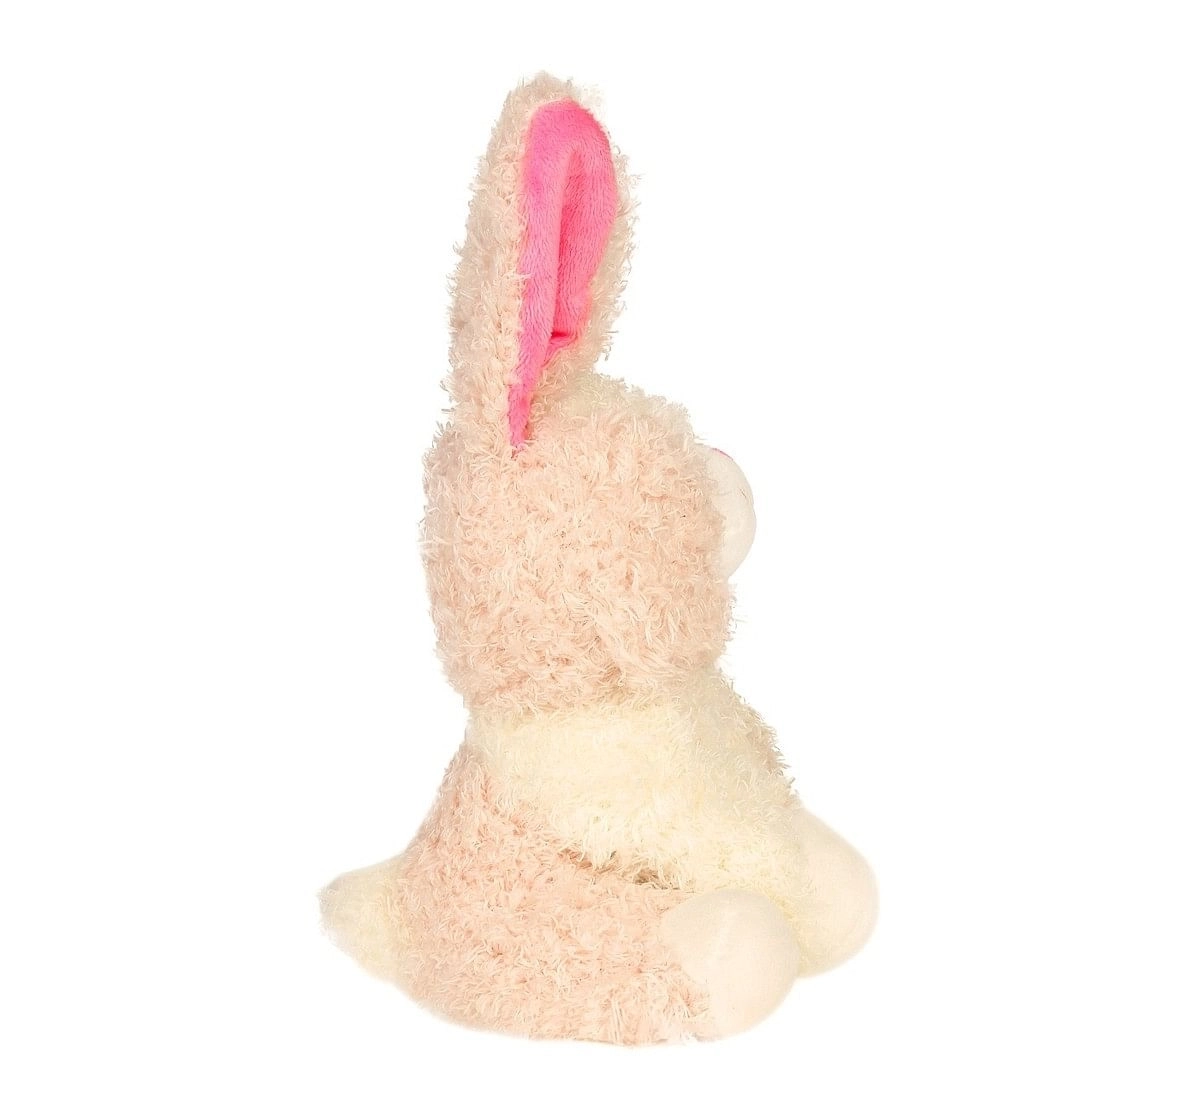 Sophie Rabbit Plush , 17Cms Quirky Soft Toys for Kids age 12M+ - 17 Cm (Pink)